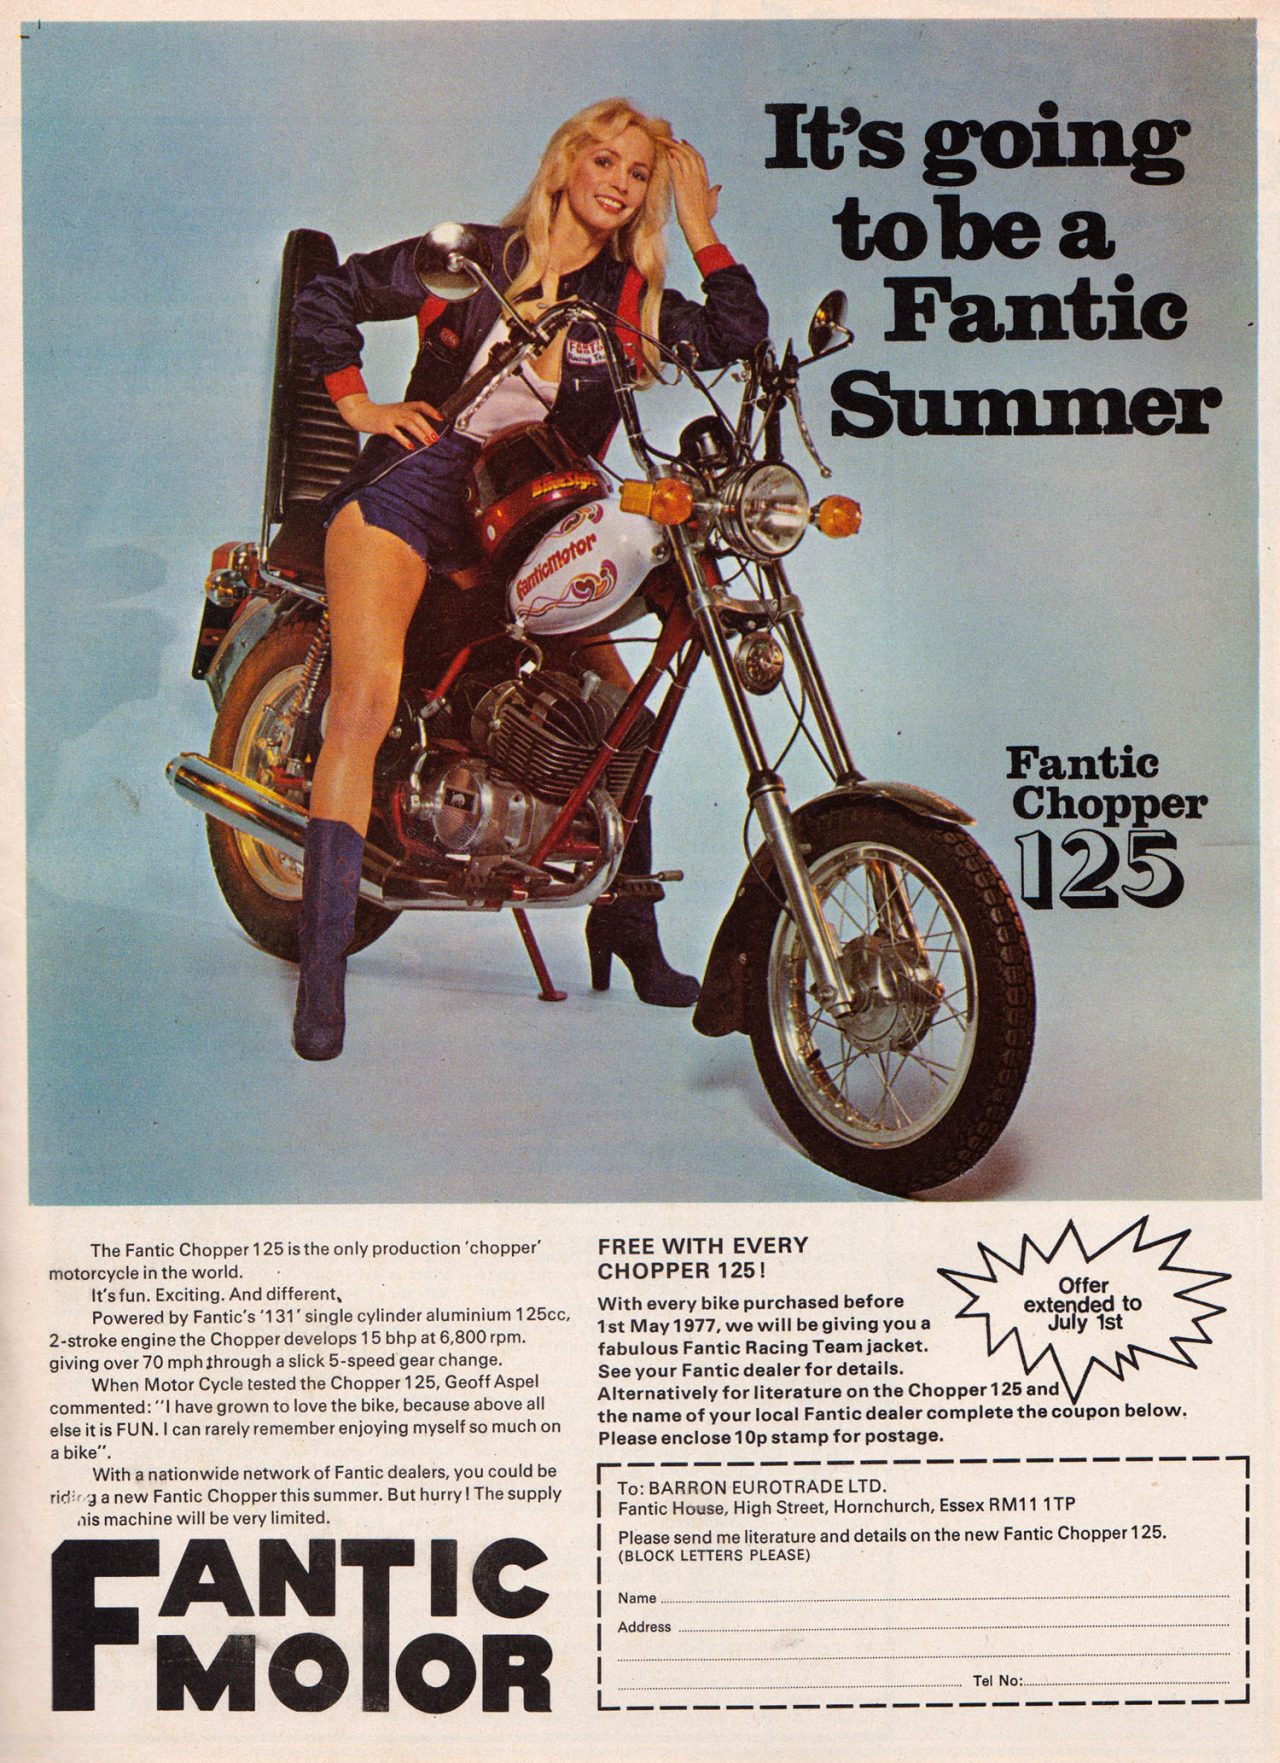 30 Dynamite Motorcycle Ads From The Seventies Flashbak